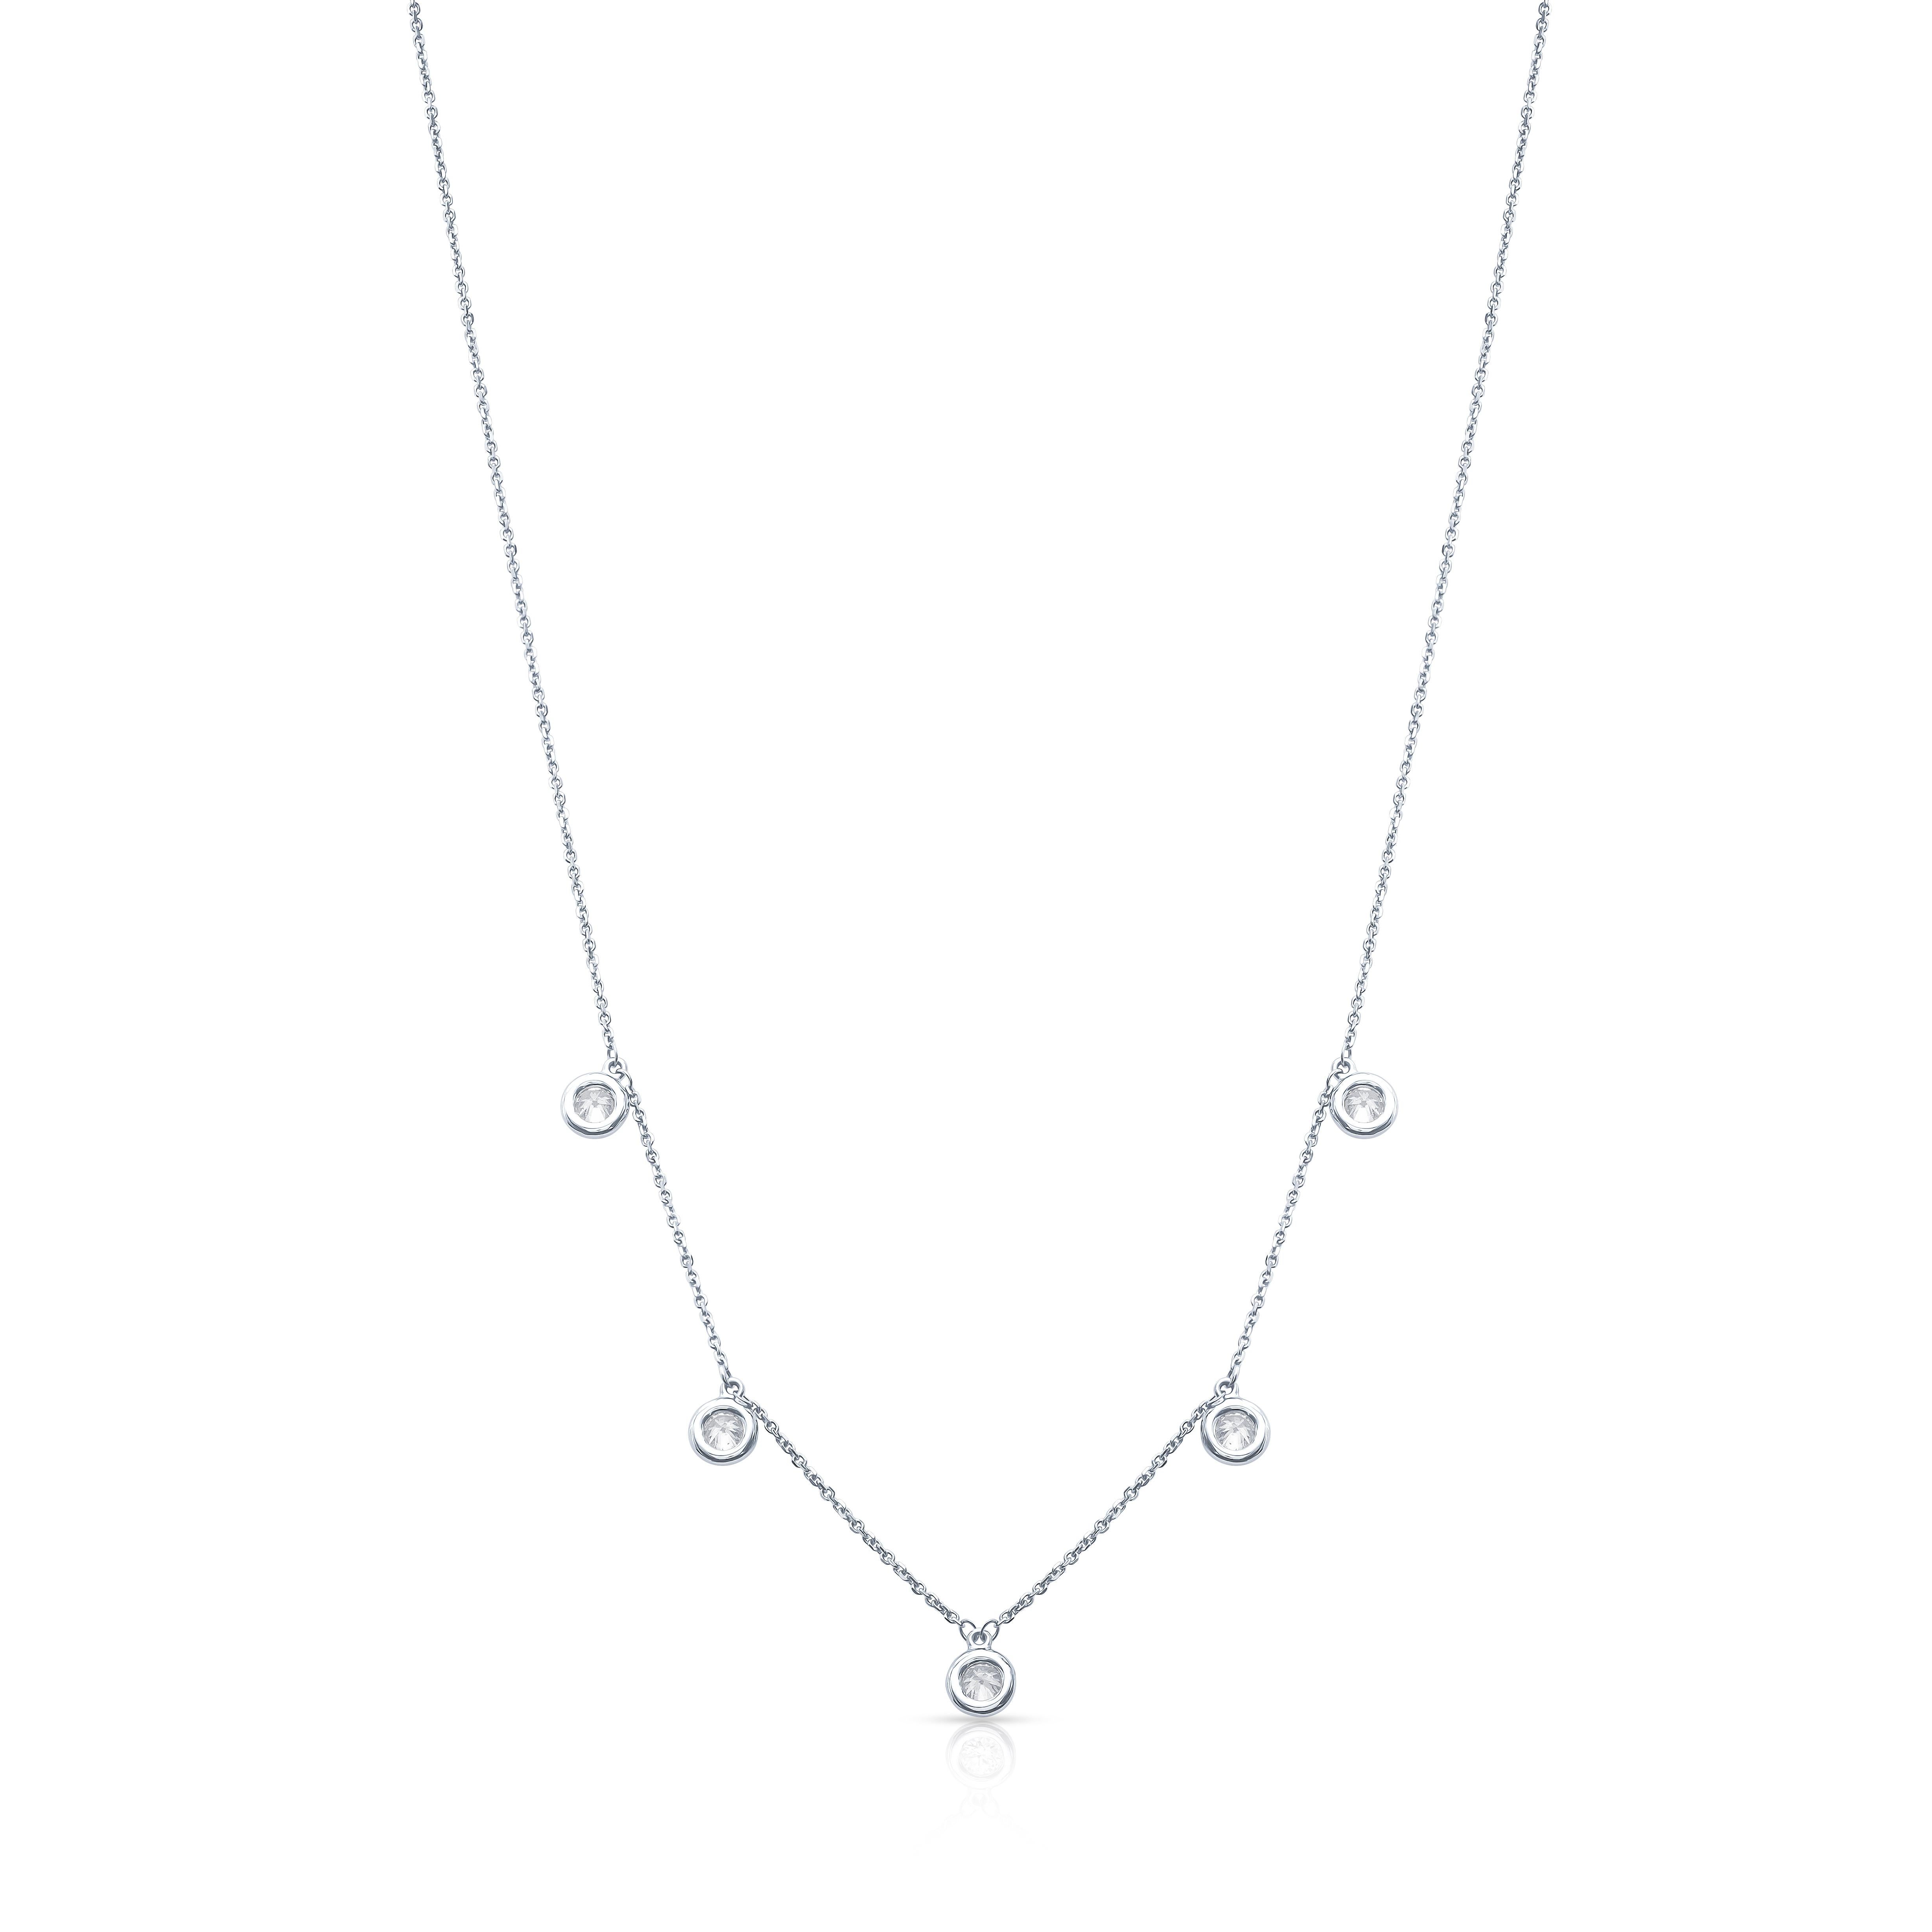 A very fine diamonds by the yard style necklace in 14 karat white gold comprised of five round diamonds, approx. 0.97 ctw, bezel set every 1